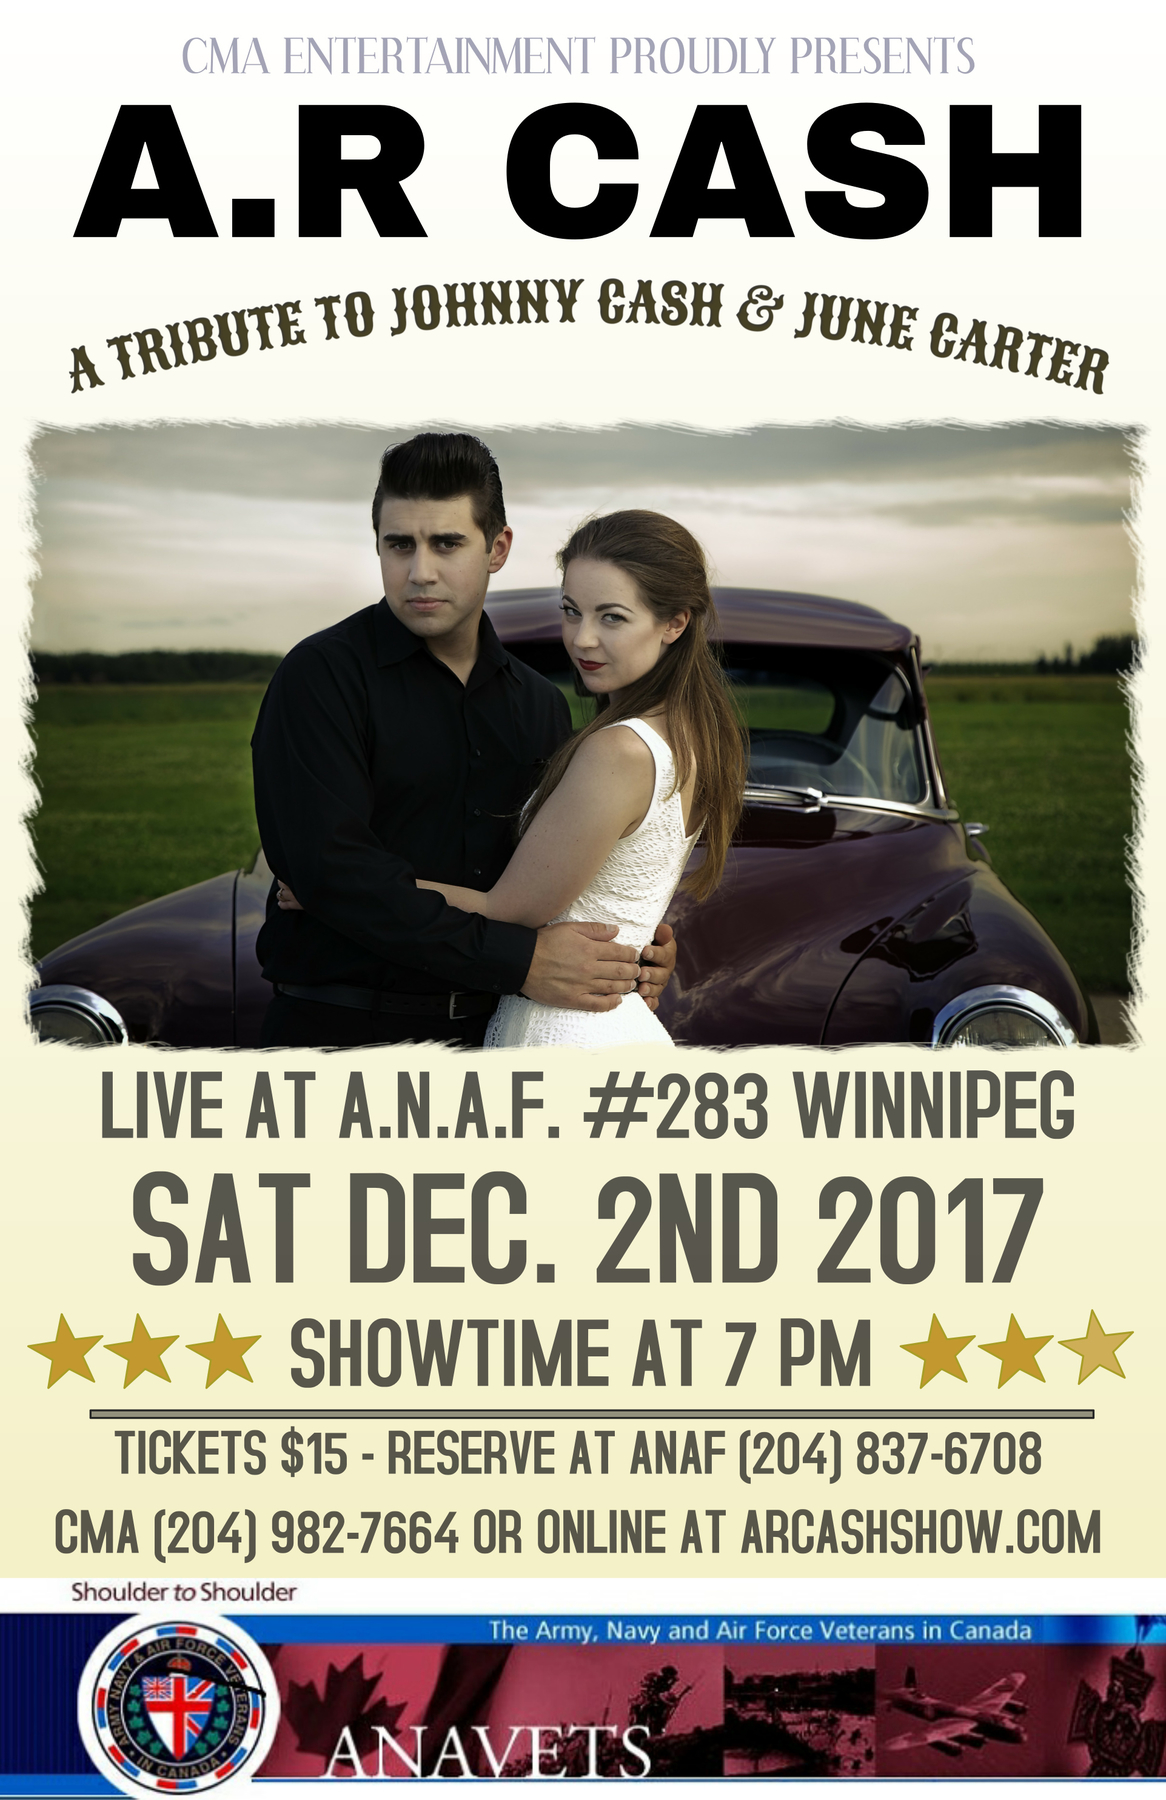 Winnipeg show tickets now available!